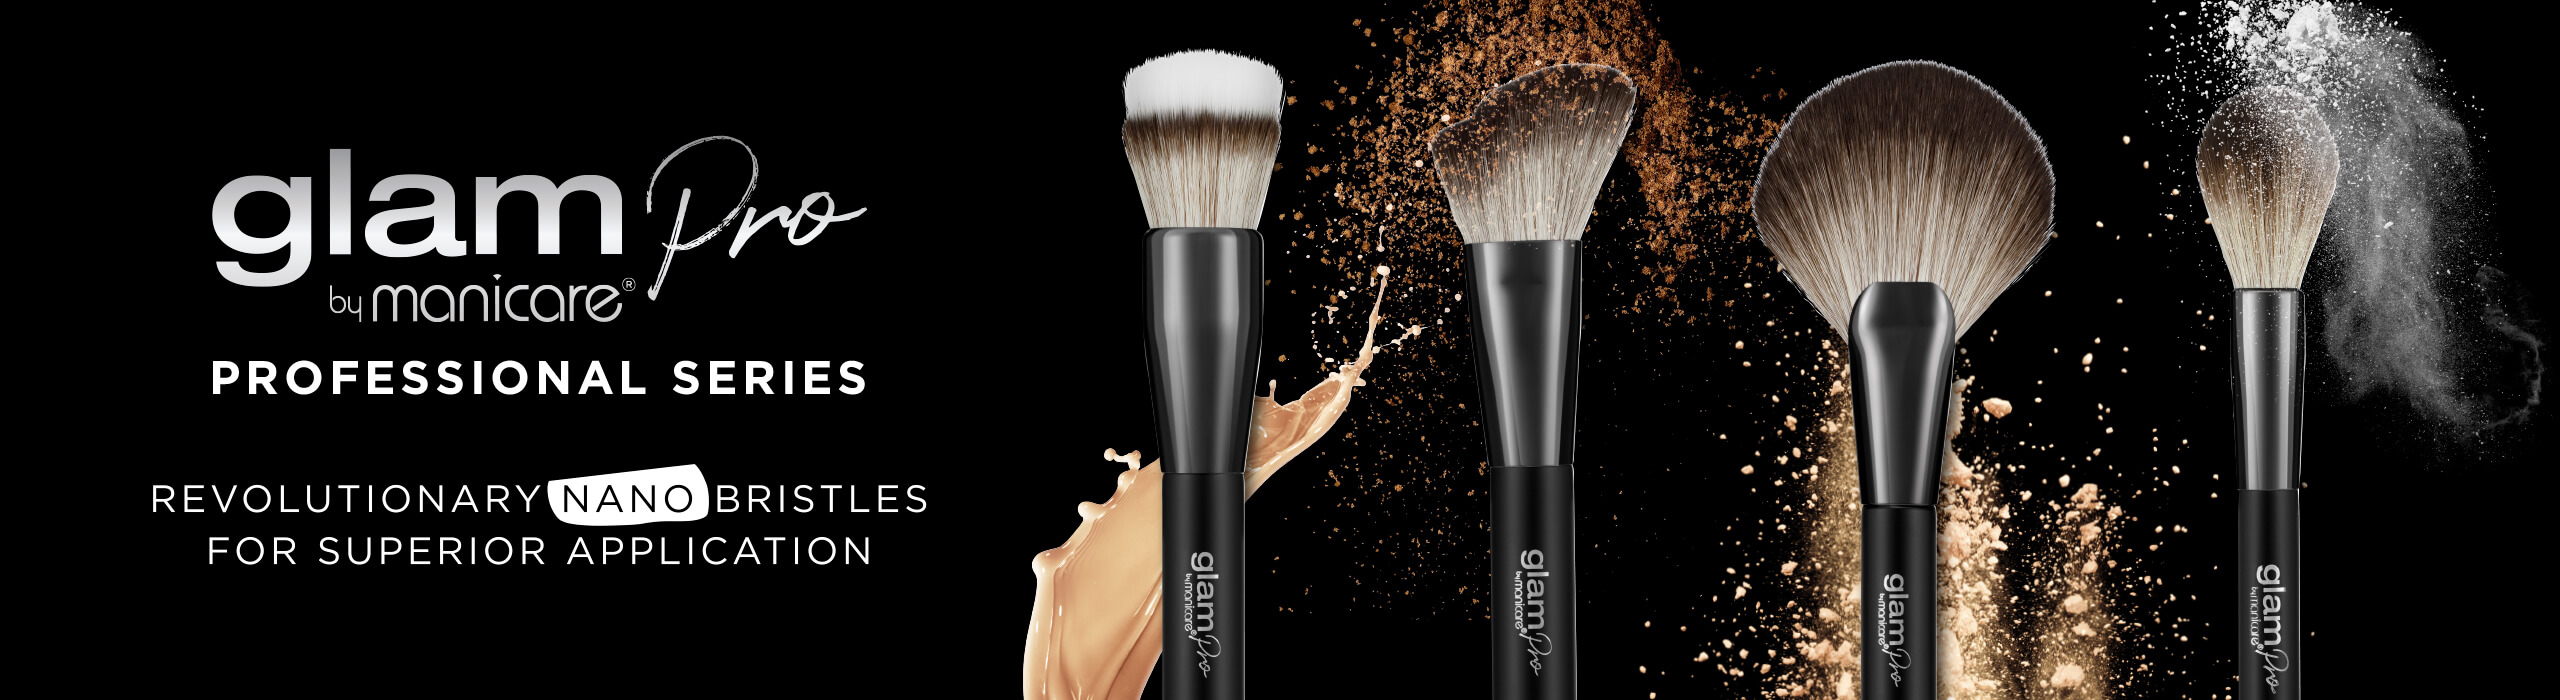 Glam By Manicare® Professional Cosmetic Brush Series - Revolutionary nano bristles for superior application.